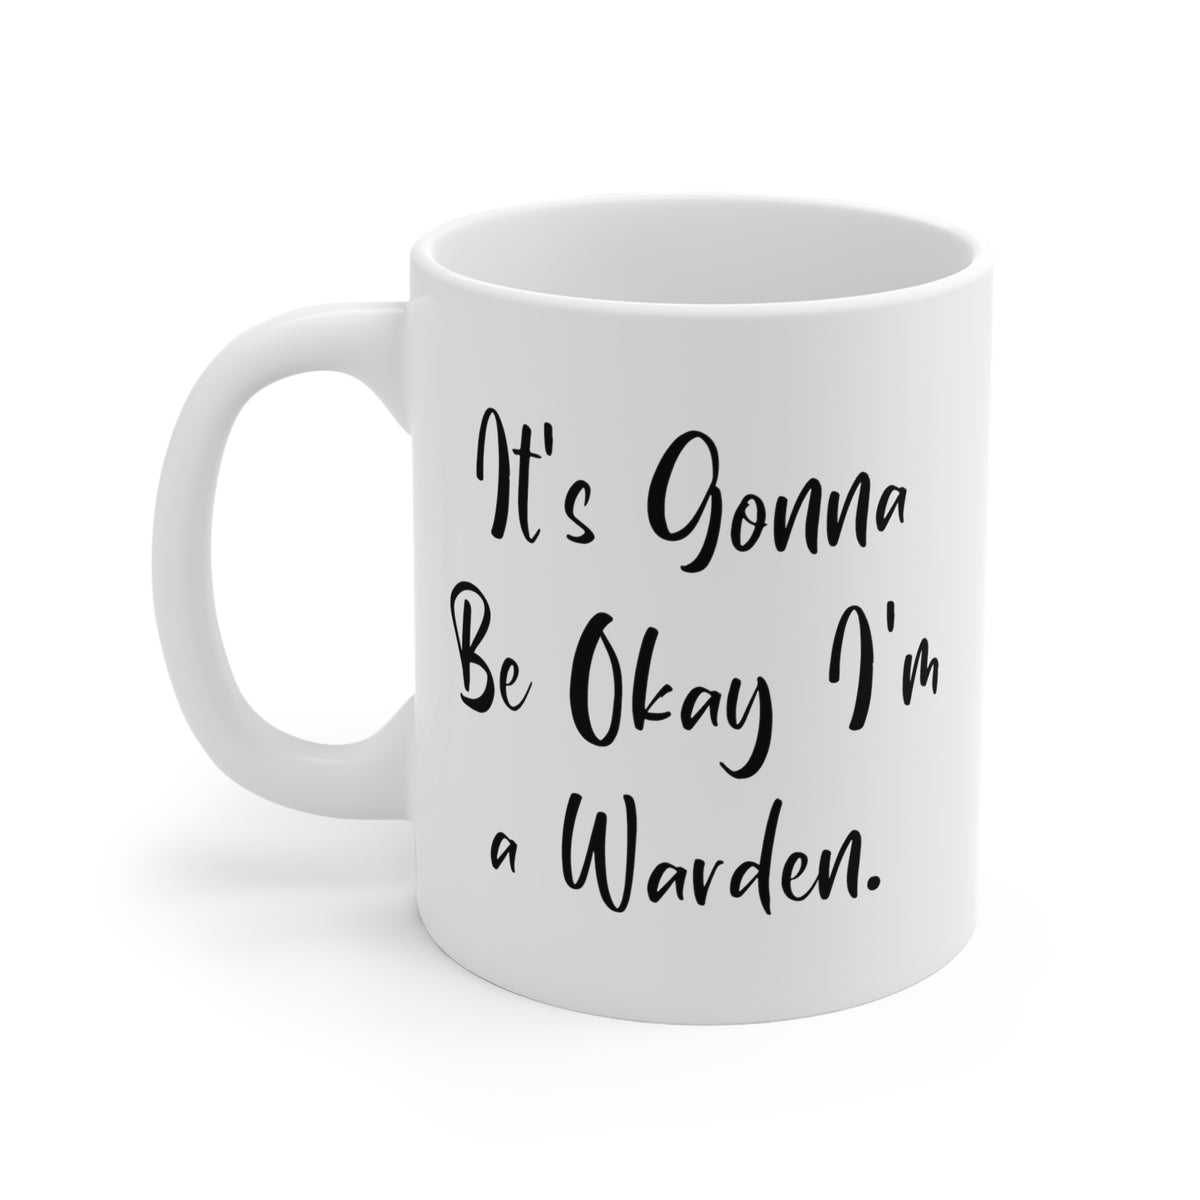 Funny Warden 11oz 15oz Mug, It's Gonna Be Okay I'm a Warden, Present For Friends, Fancy Gifts From Coworkers, Jail, Prison, Cell, Bars, Inmate, Criminal, Law enforcement - CA